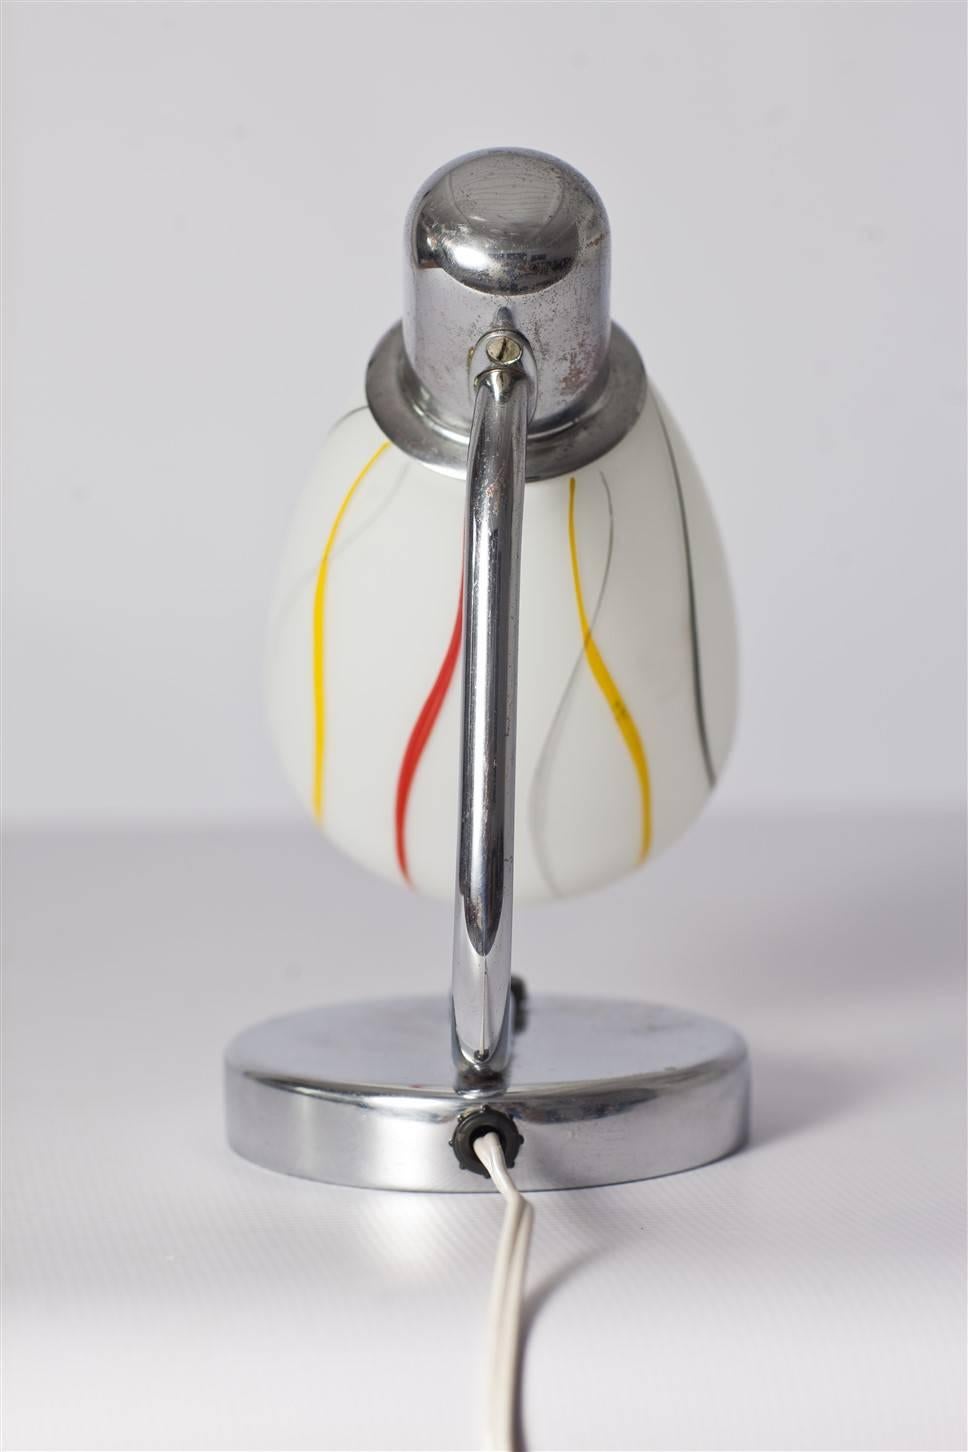 This chrome table lamp was made circa 1940s-1950s by Napako, in former Czechoslovakia. 
Features original lampshade with colorful stripes. Lamp is functional, kept in original, good condition with patina.
Using lightbulbs with an E27 thread.